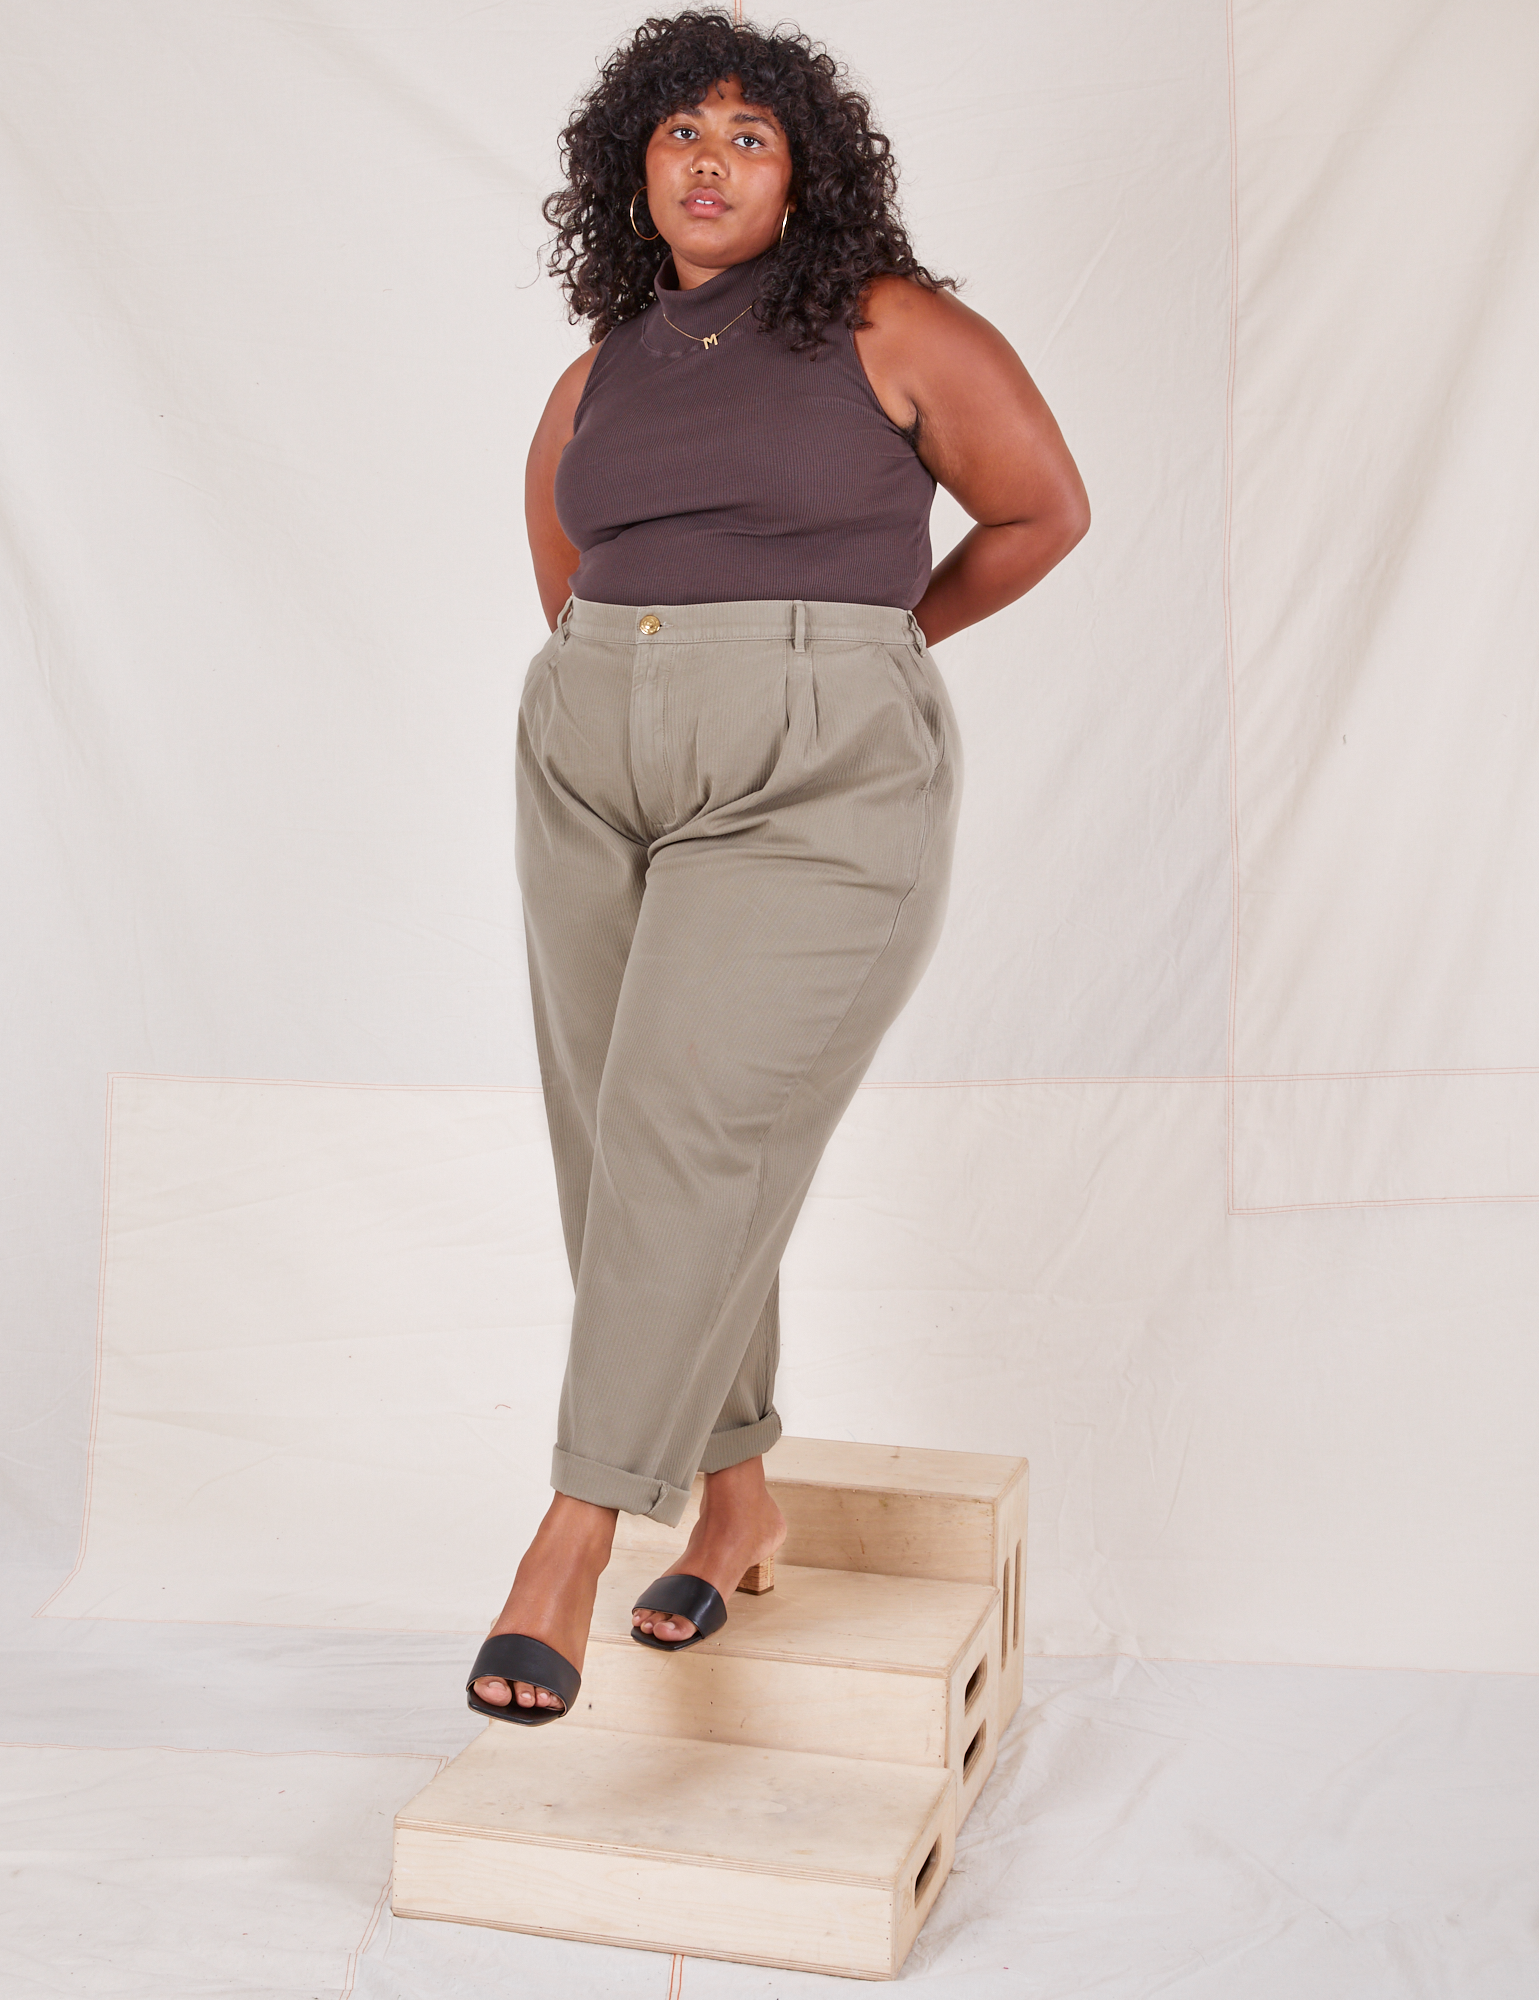 Morgan is 5&#39;5&quot; and wearing 1XL Heritage Trousers in Khaki Grey paired with espresso brown Sleeveless Turtleneck